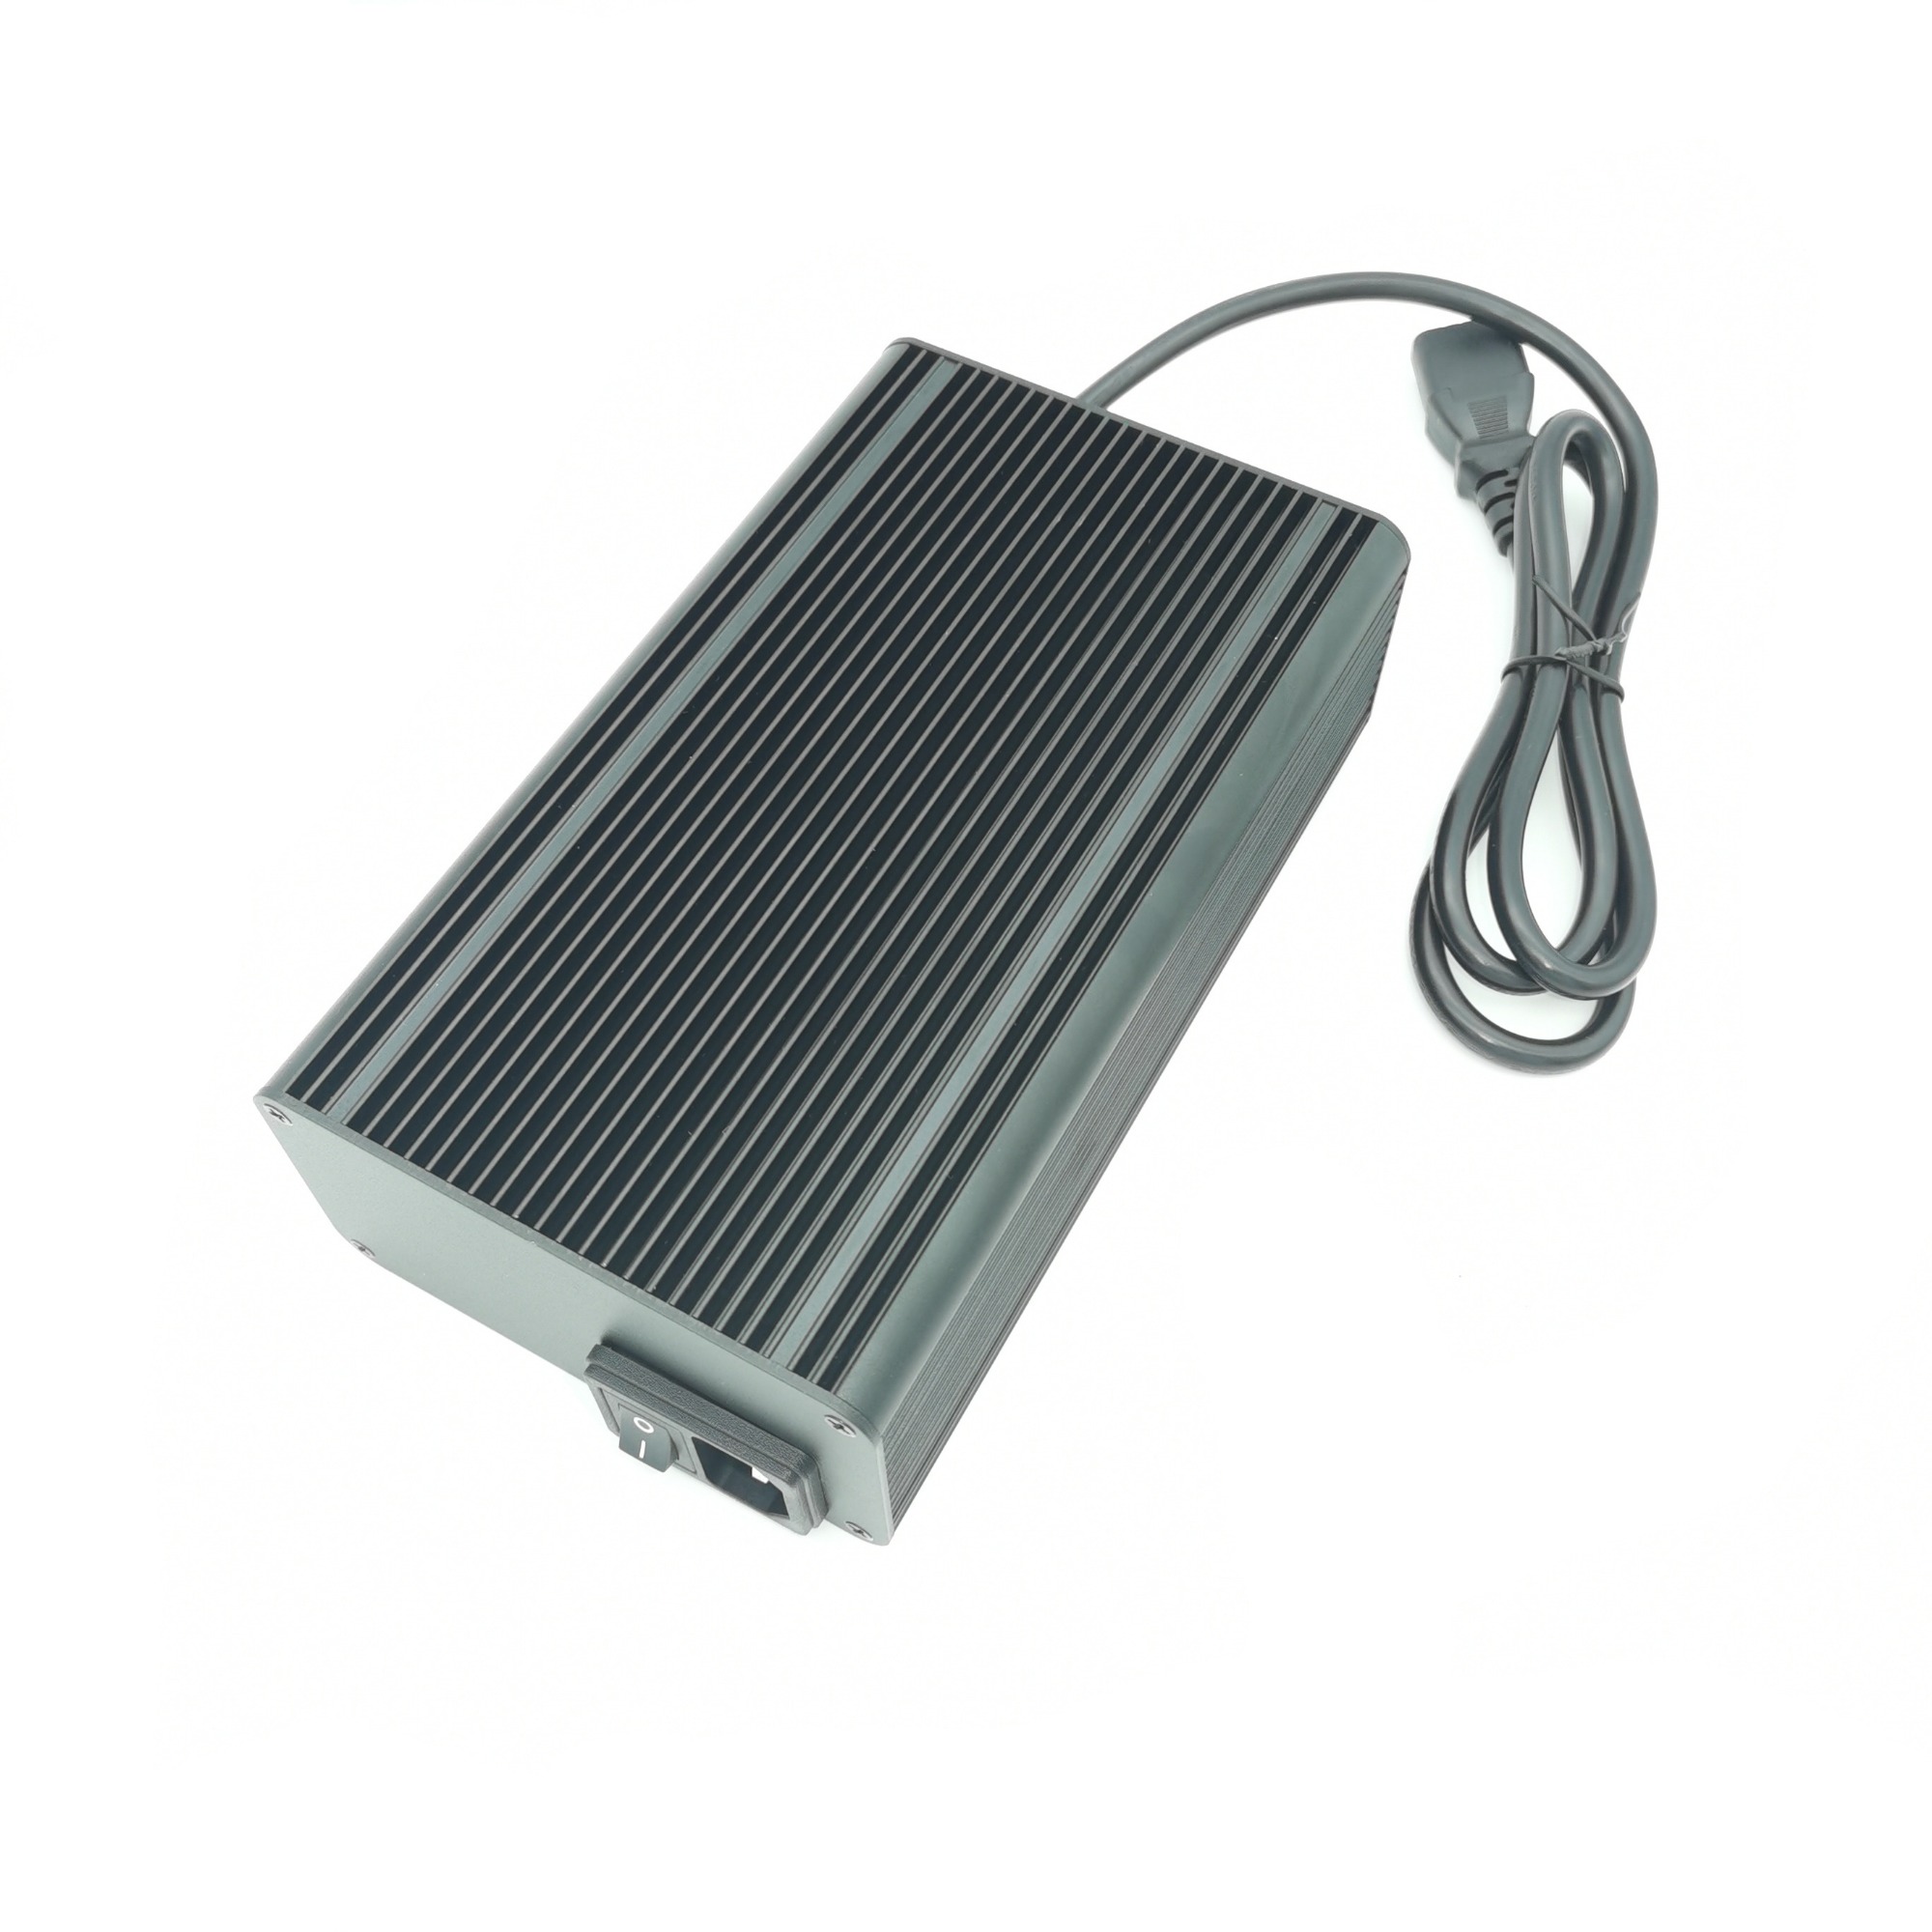 Smart 88.2V 4A lithium Battery Charger Dustproof type for 21S Li-ion battery charging